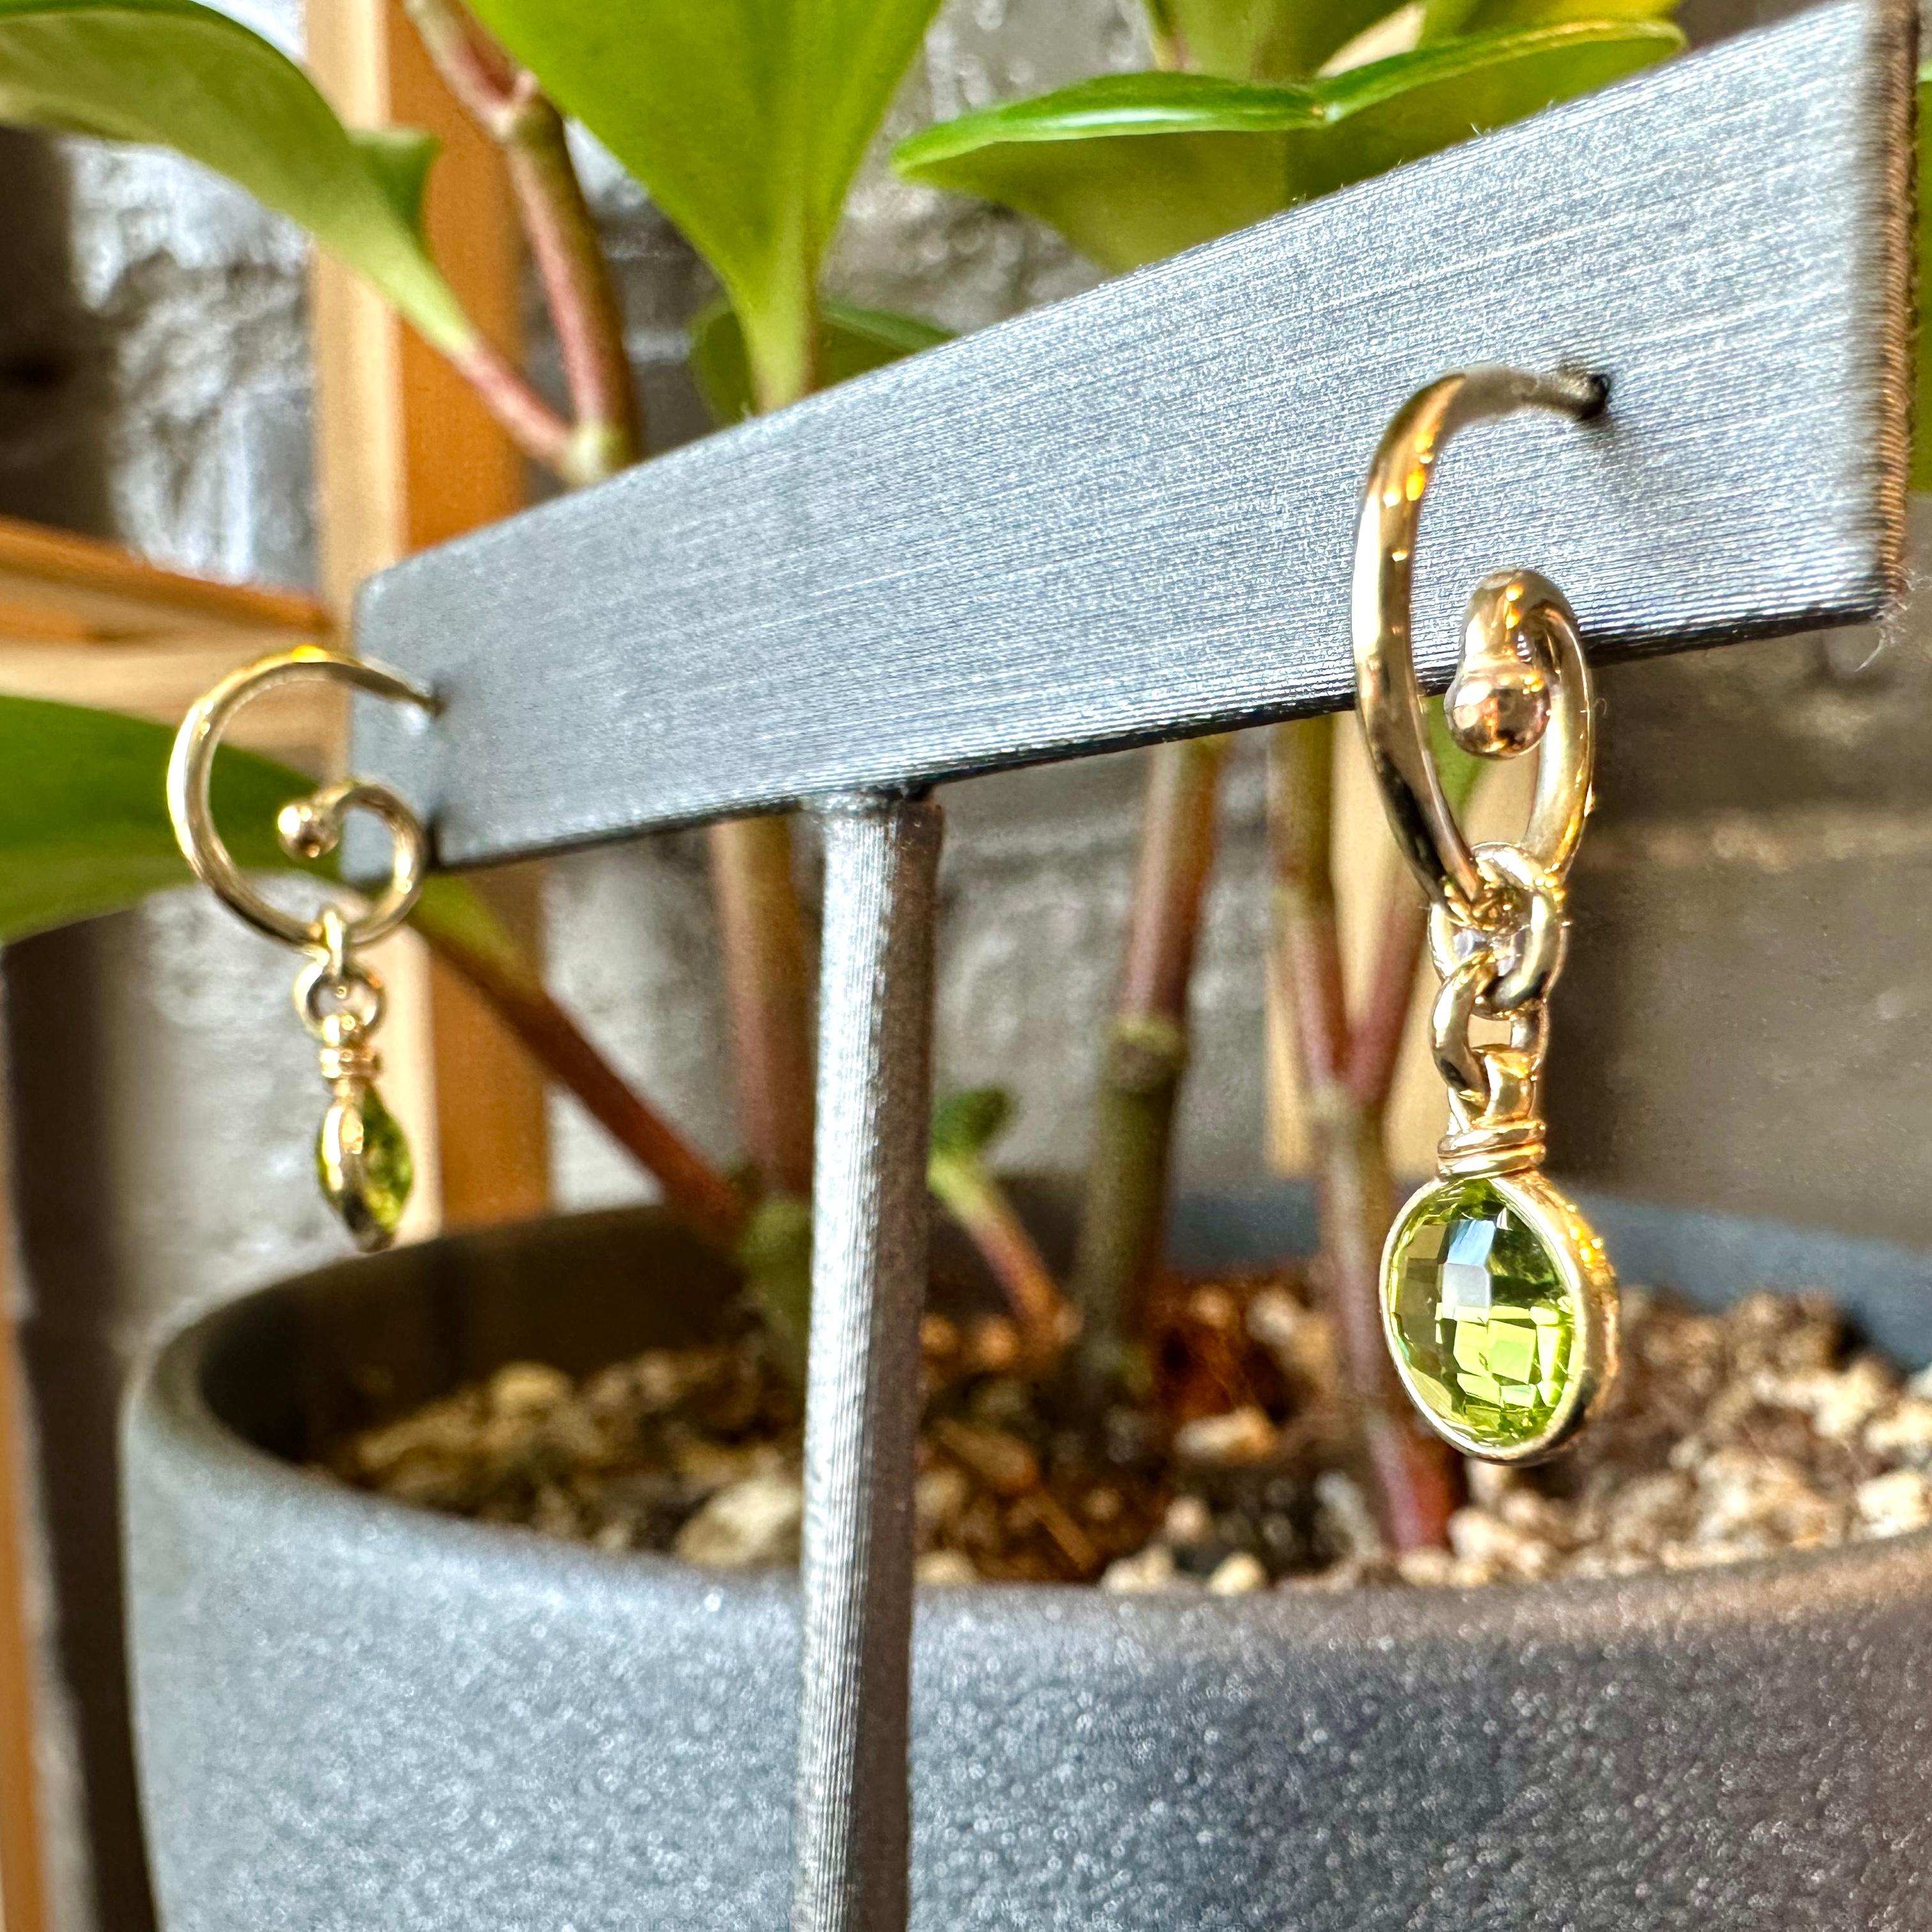 These 14k yellow gold hoop hand shaped earrings were named for and crafted to symbolize Growth, spiraling in like delicate fiddle heads ready to unfurl. Mary Elizabeth, of Glitter and Gold Studio, chose double sided checkerboard cut (Capri cut)